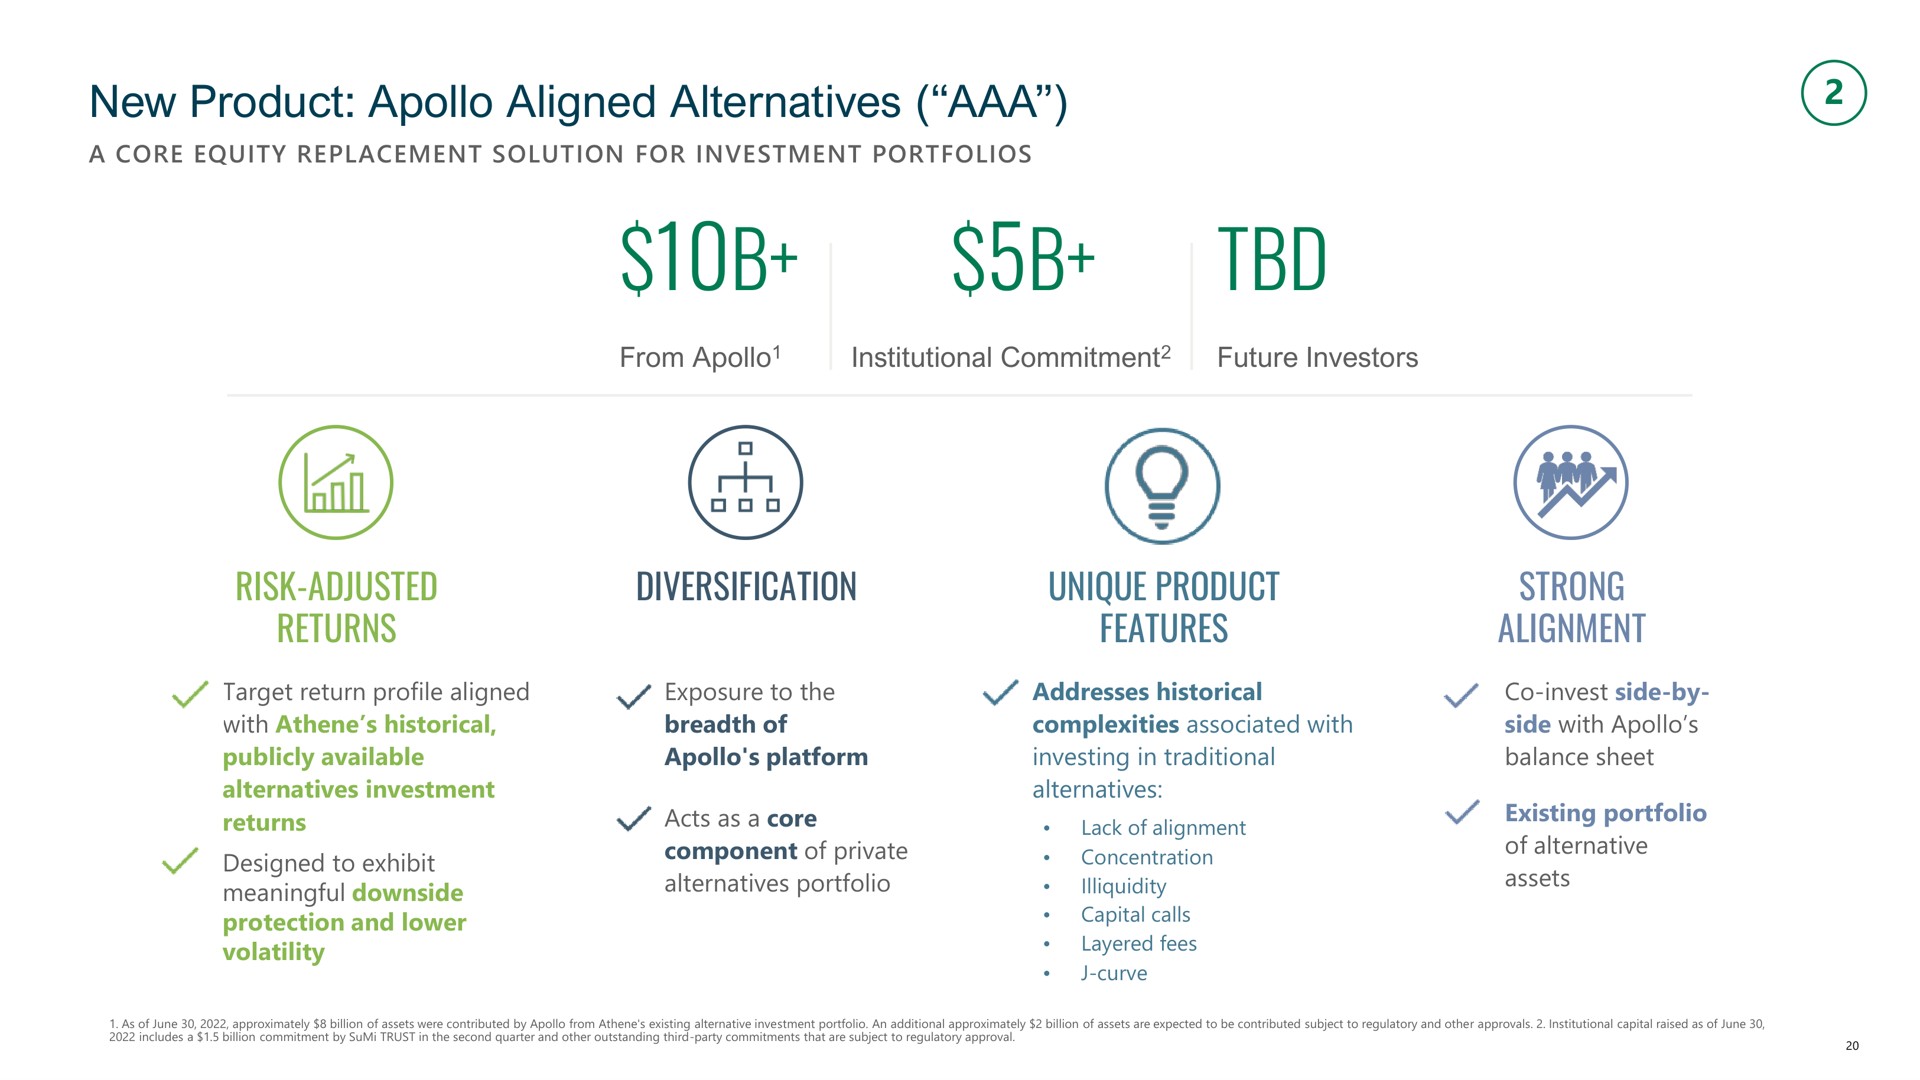 new product aligned alternatives risk adjusted returns diversification unique product features strong alignment sob | Apollo Global Management